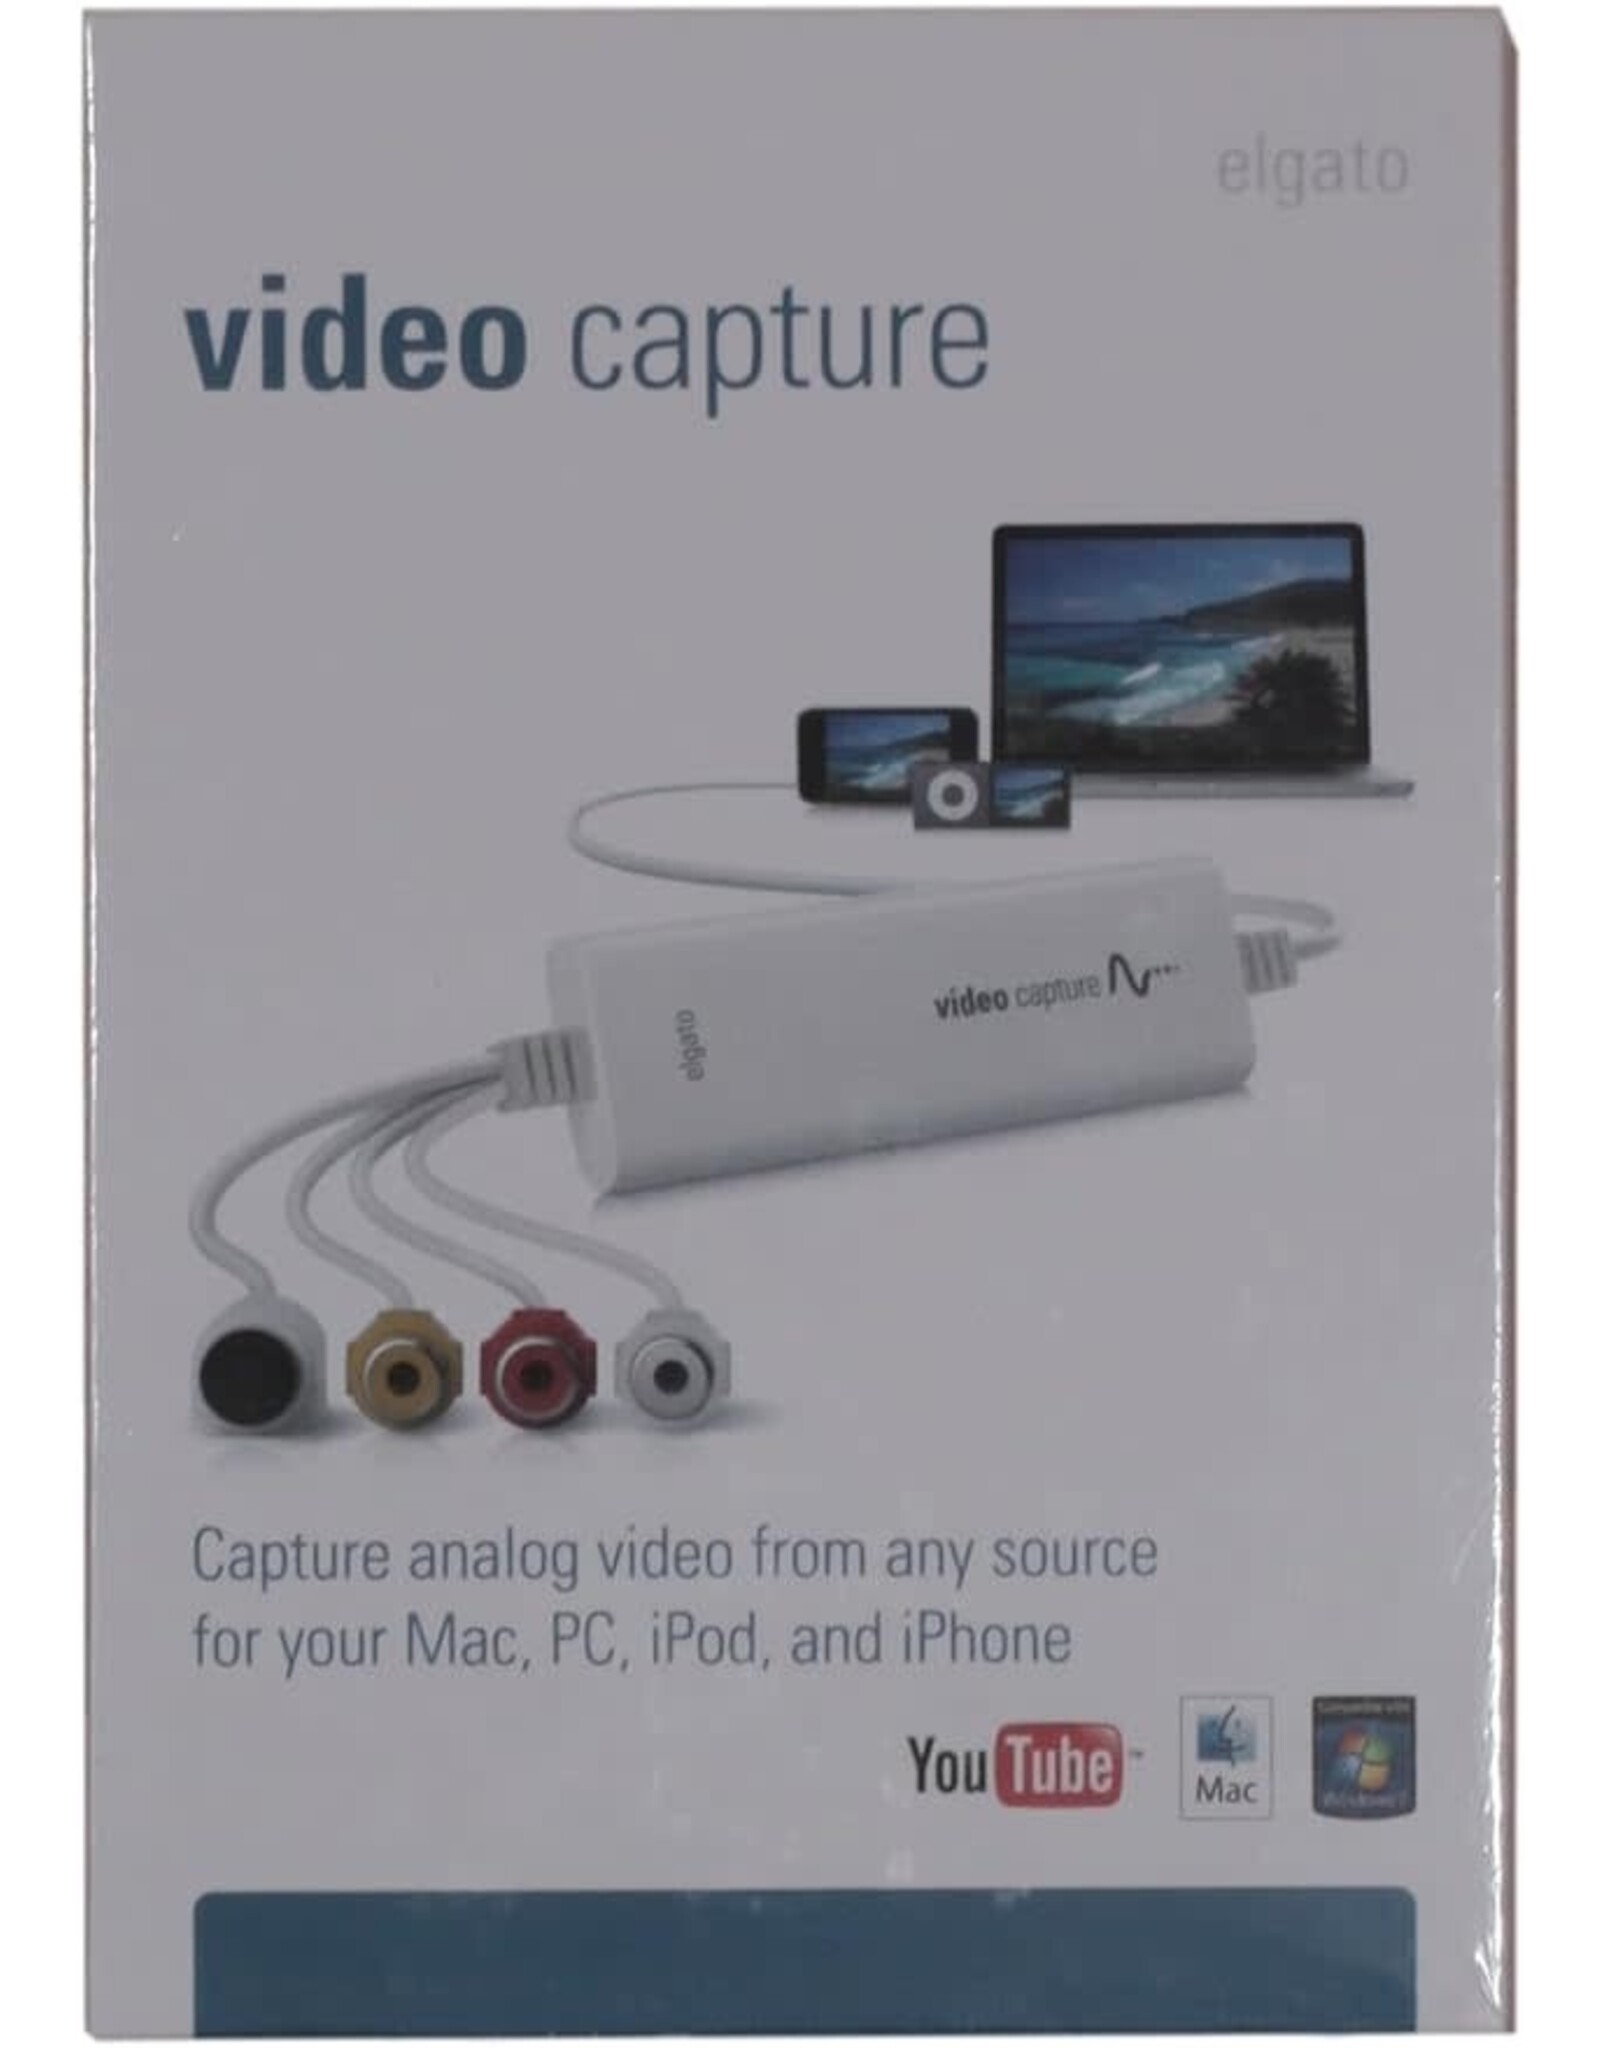 Elgato Video Capture – USB 2.0 Capture Card Device, Easy to Use